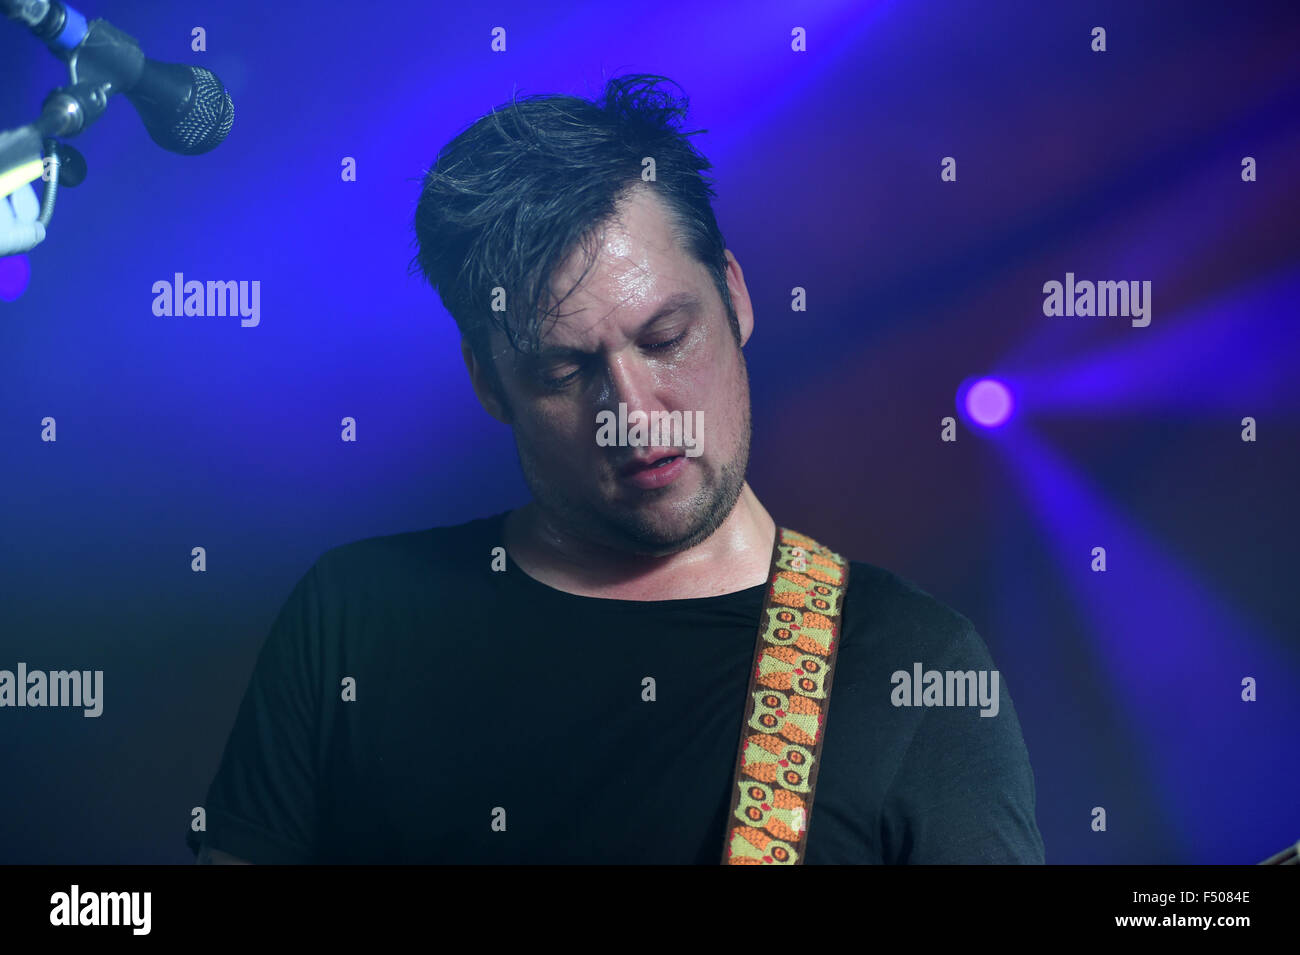 Norfolk, VIRGINIA, USA. 24th Oct, 2015. MODEST MOUSE comes to the CONSTANT CENTER at OLD DOMINION UNIVERSITY in NORFOLK, VIRGINIA on 24 OCTOBER 2015. © Jeff Moore/ZUMA Wire/Alamy Live News Stock Photo